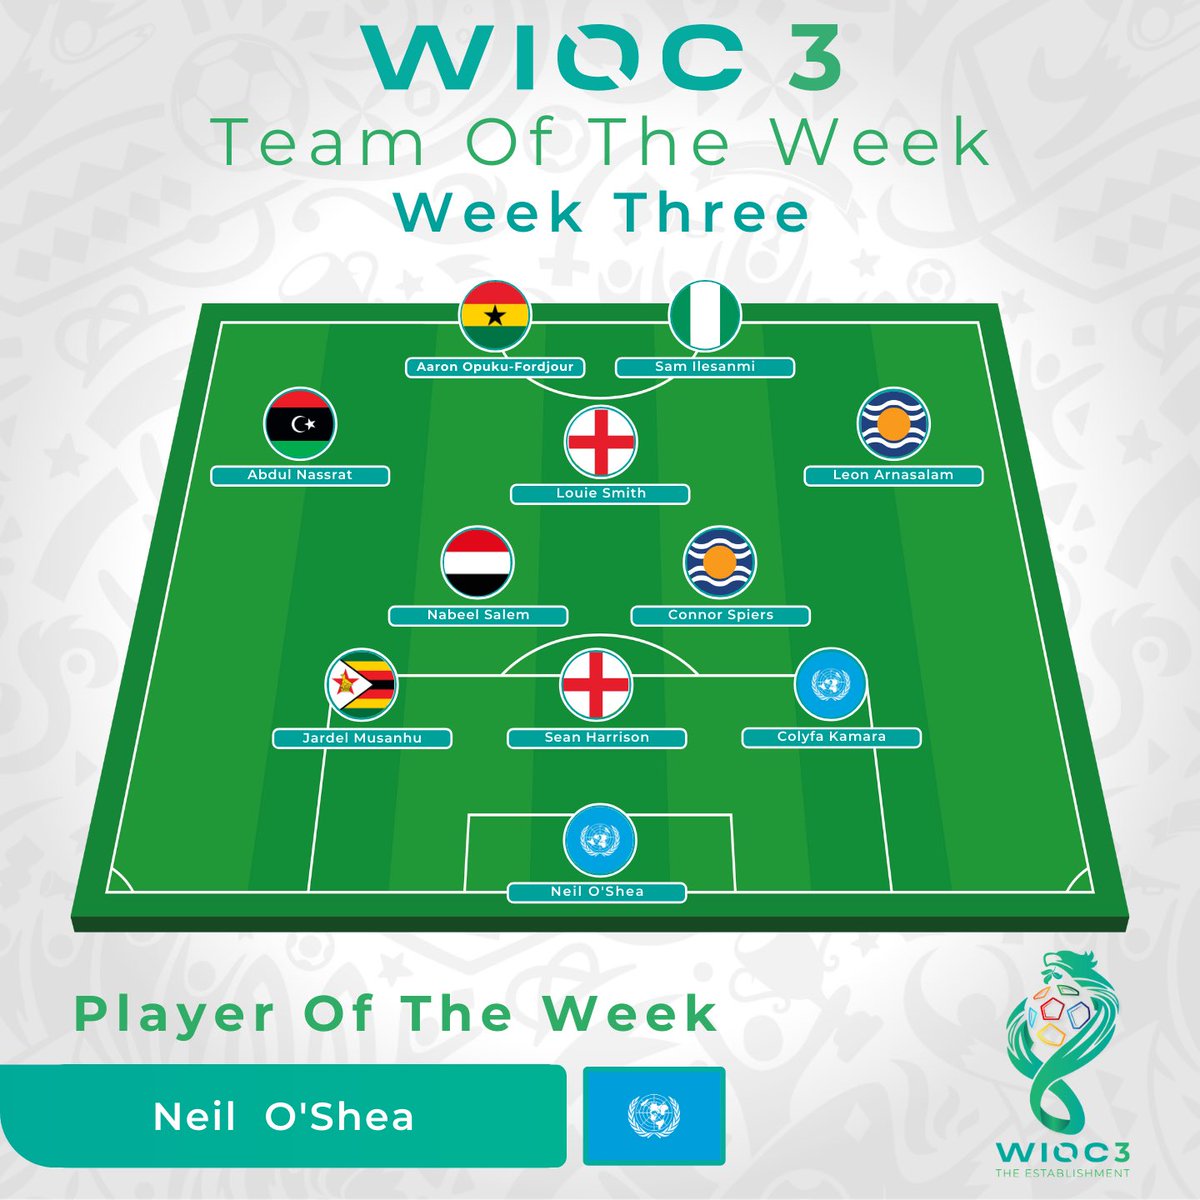 Your updated stats heading into the knockout stages and Team of the Week!

#WorldInOneCity2023 #Stats #TeamOfTheWeek